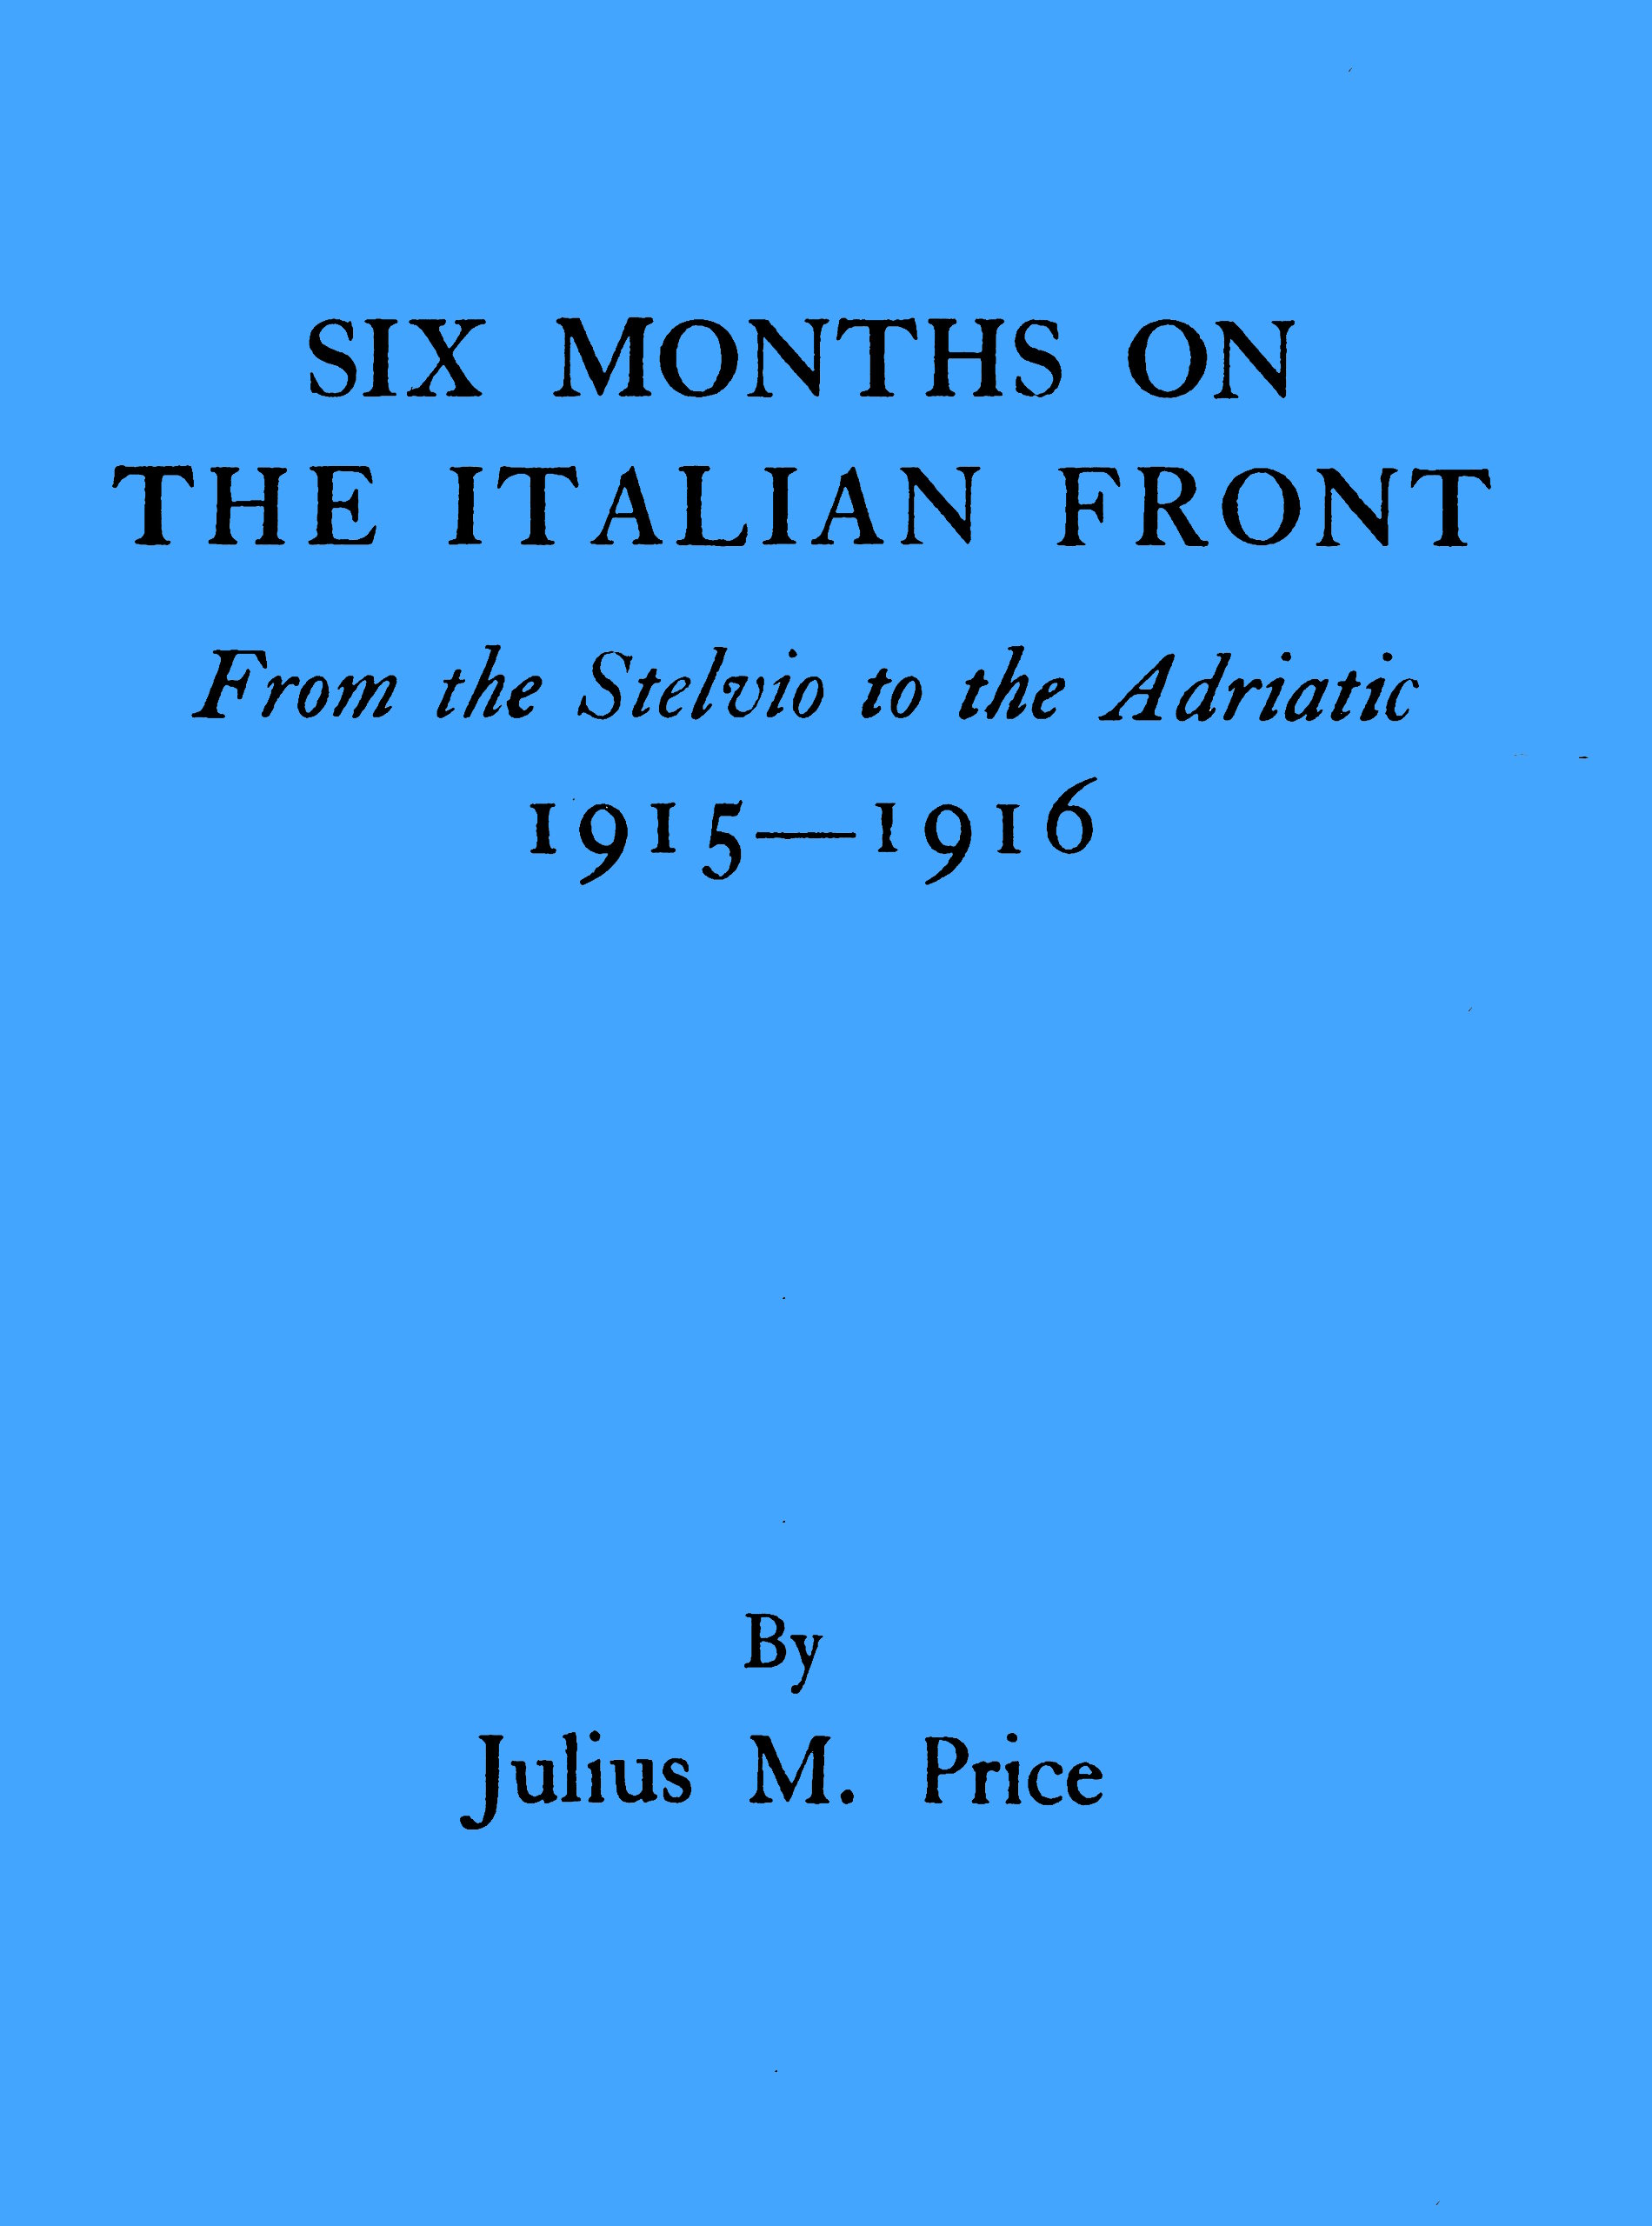 Six months on the Italian front